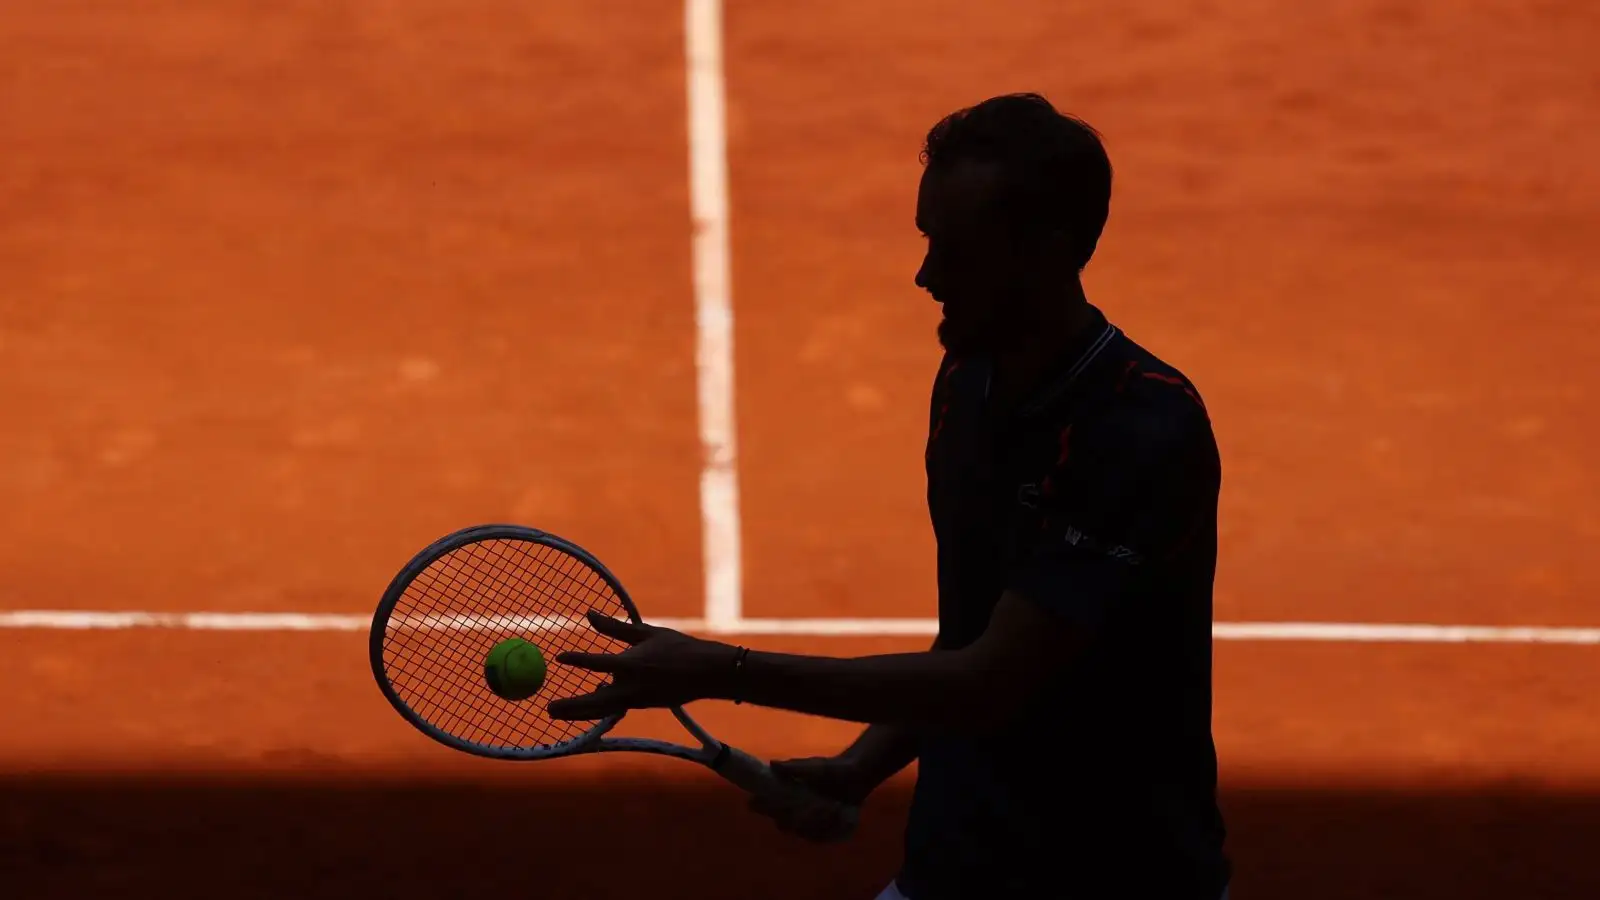 A silhouette of tennis star (and future F1 driver?) Daniil Medvedev at the Madrid Open. Madrid, May 2023.